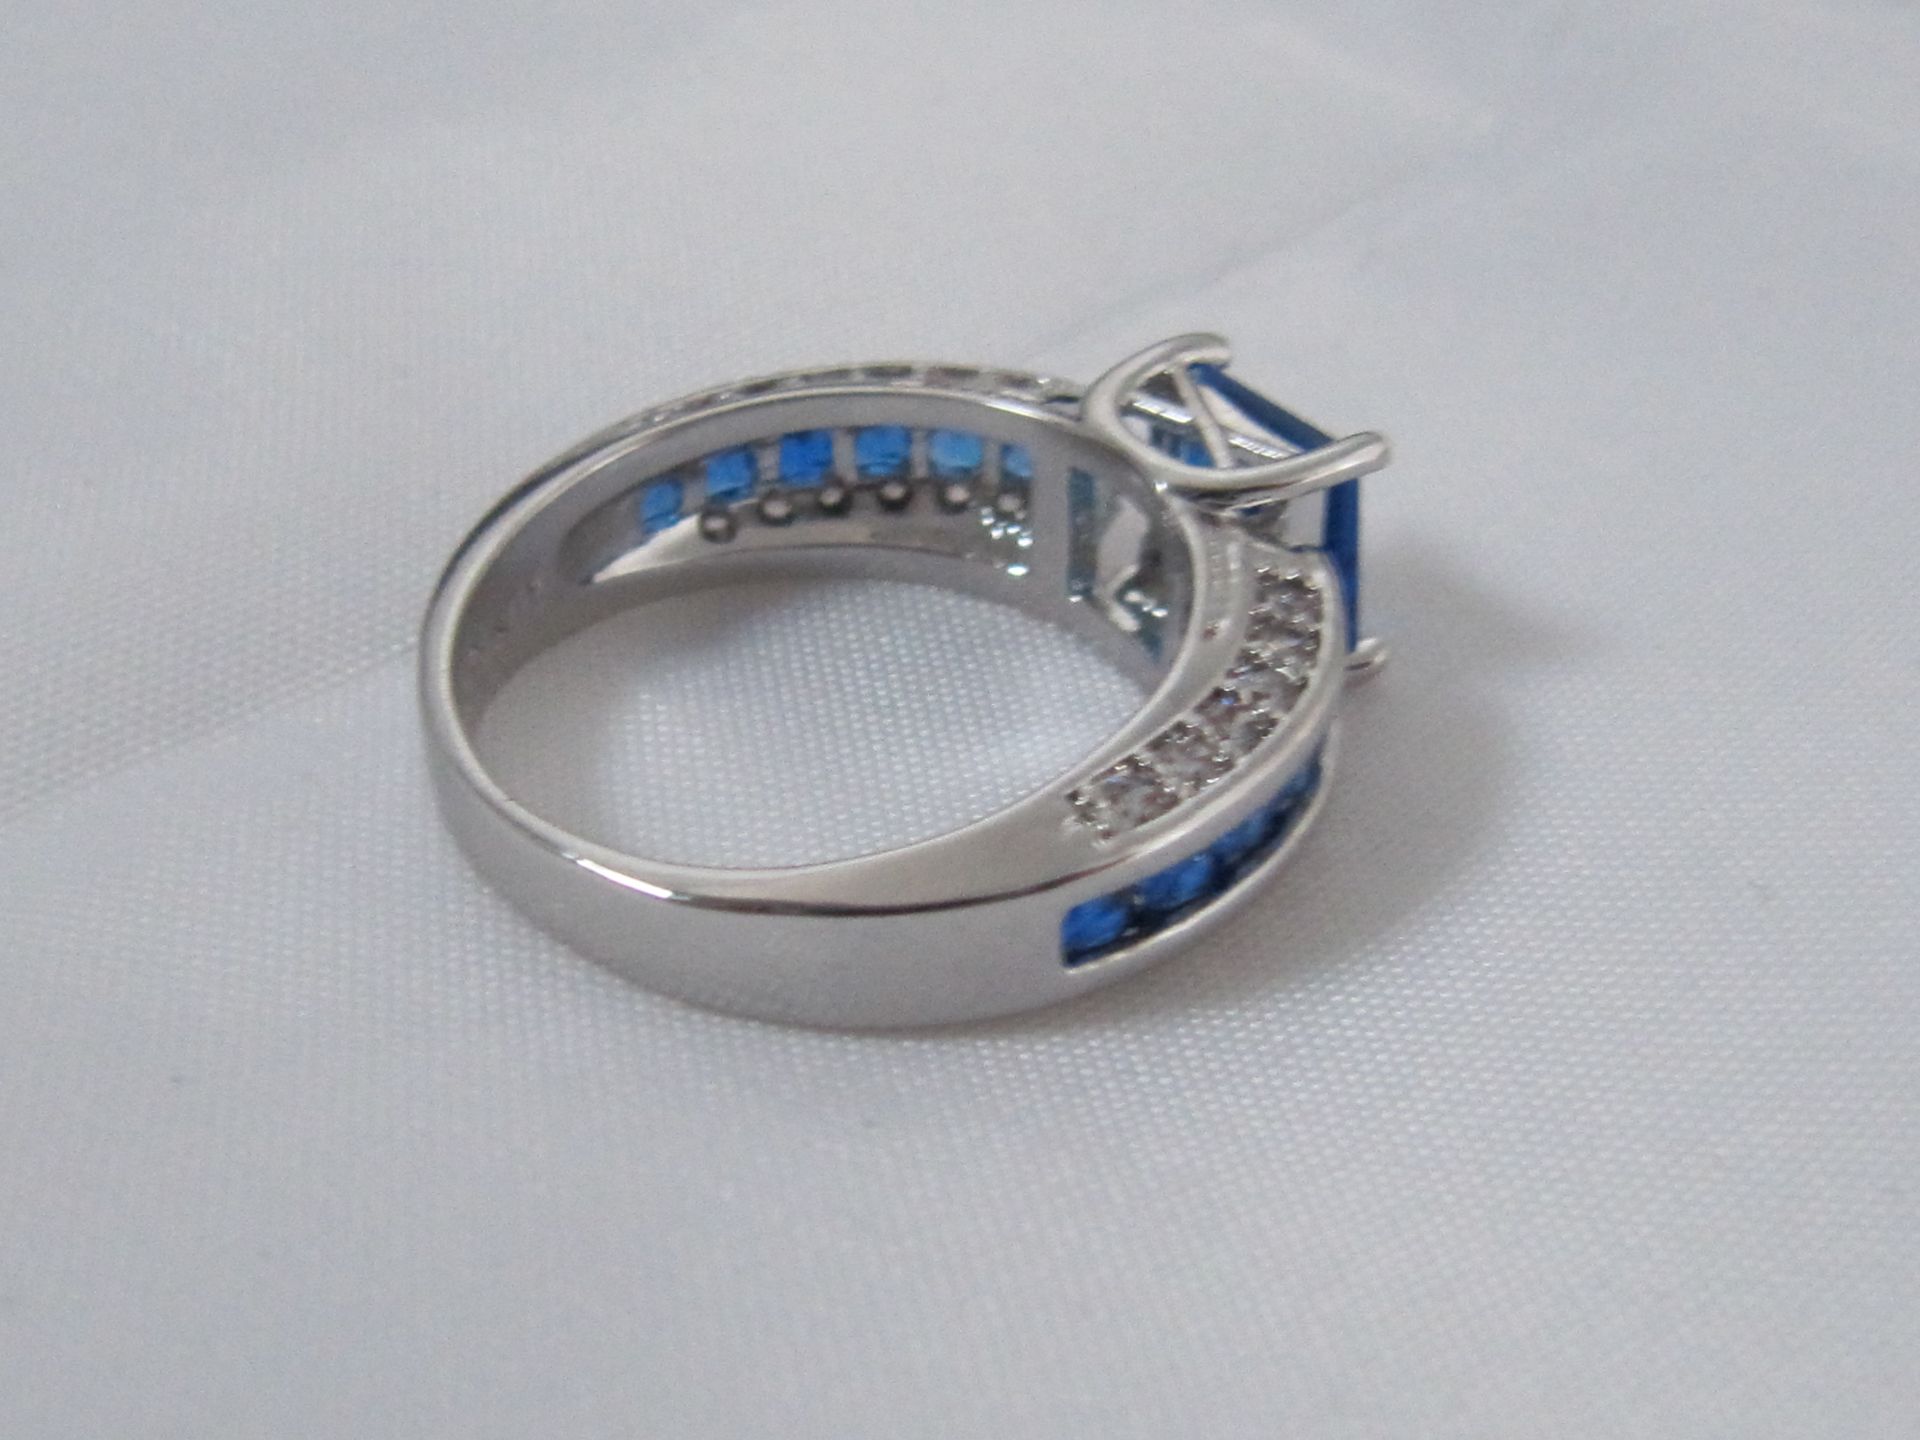 10k White Gold Filled with Blue Sapphires. Size Q. - Image 4 of 5